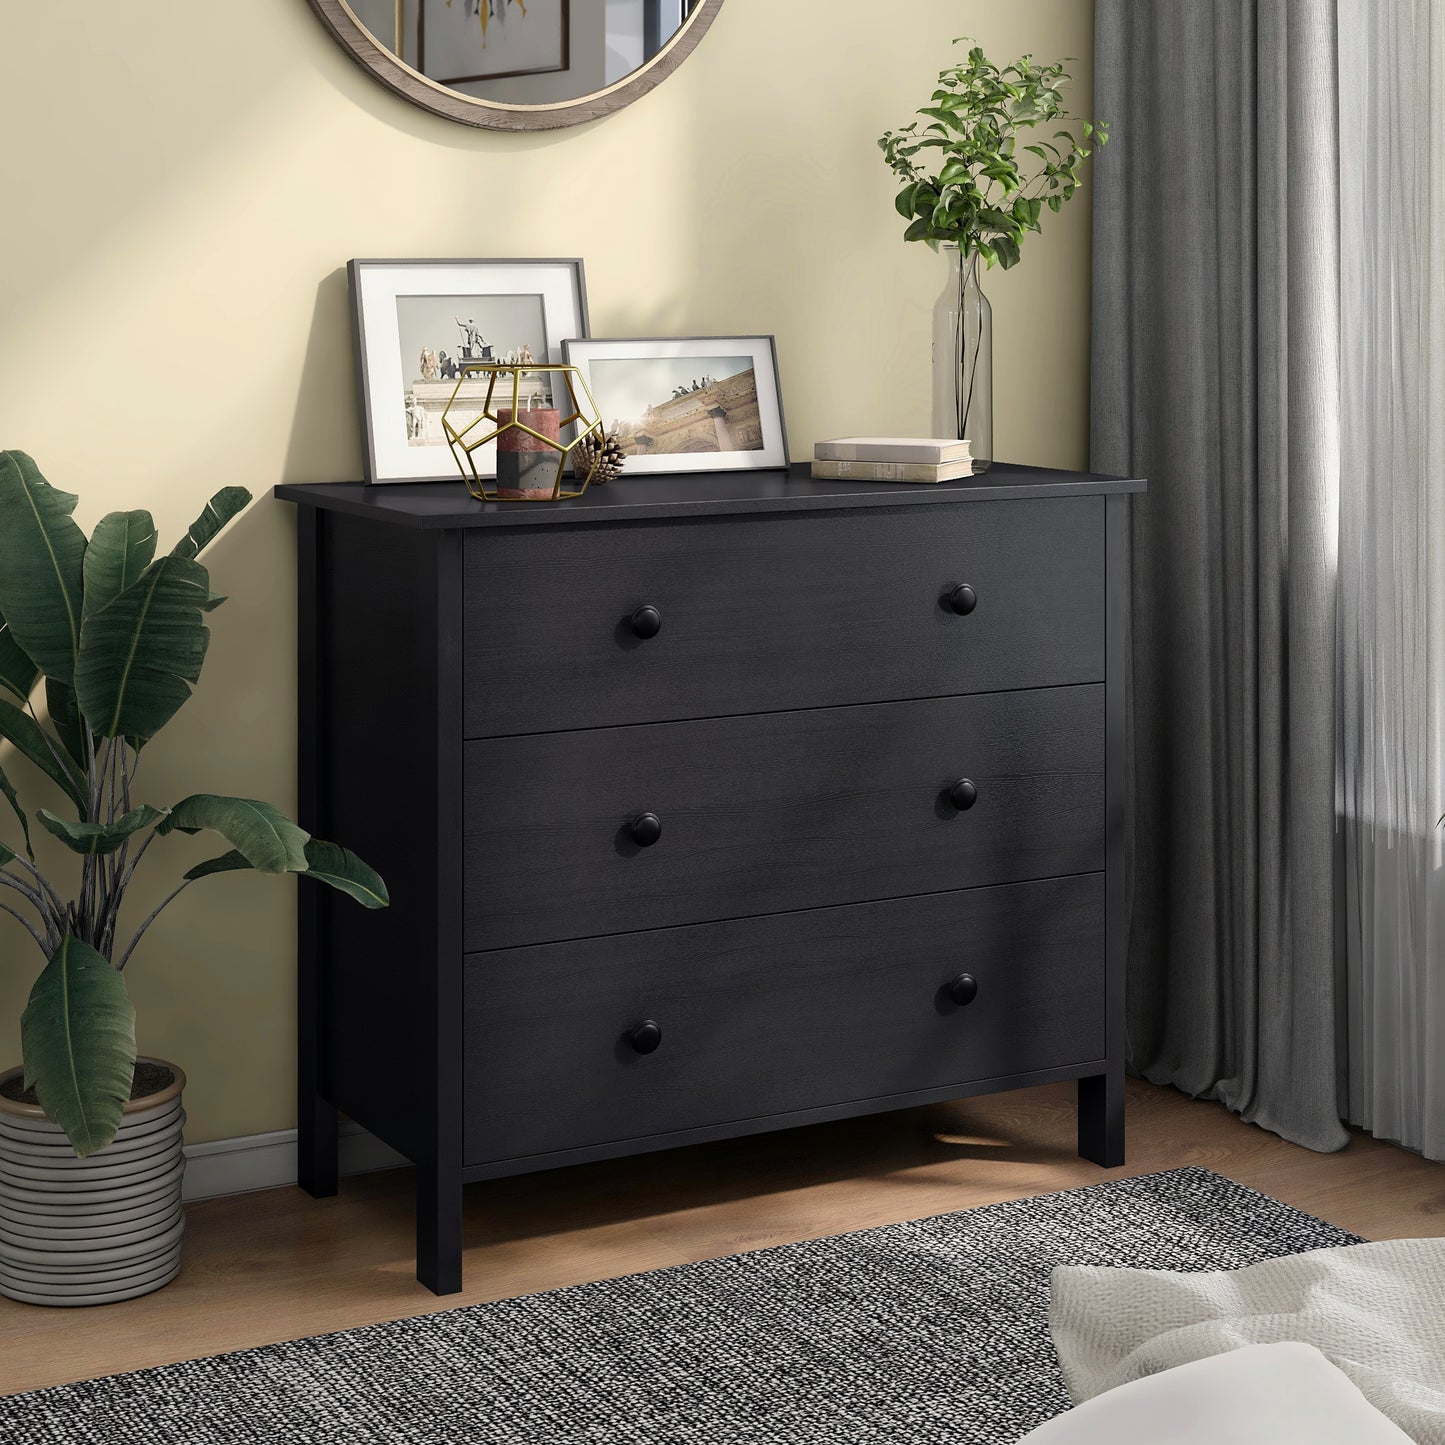 Left angled transitional black three-drawer youth dresser in a bedroom with accessories